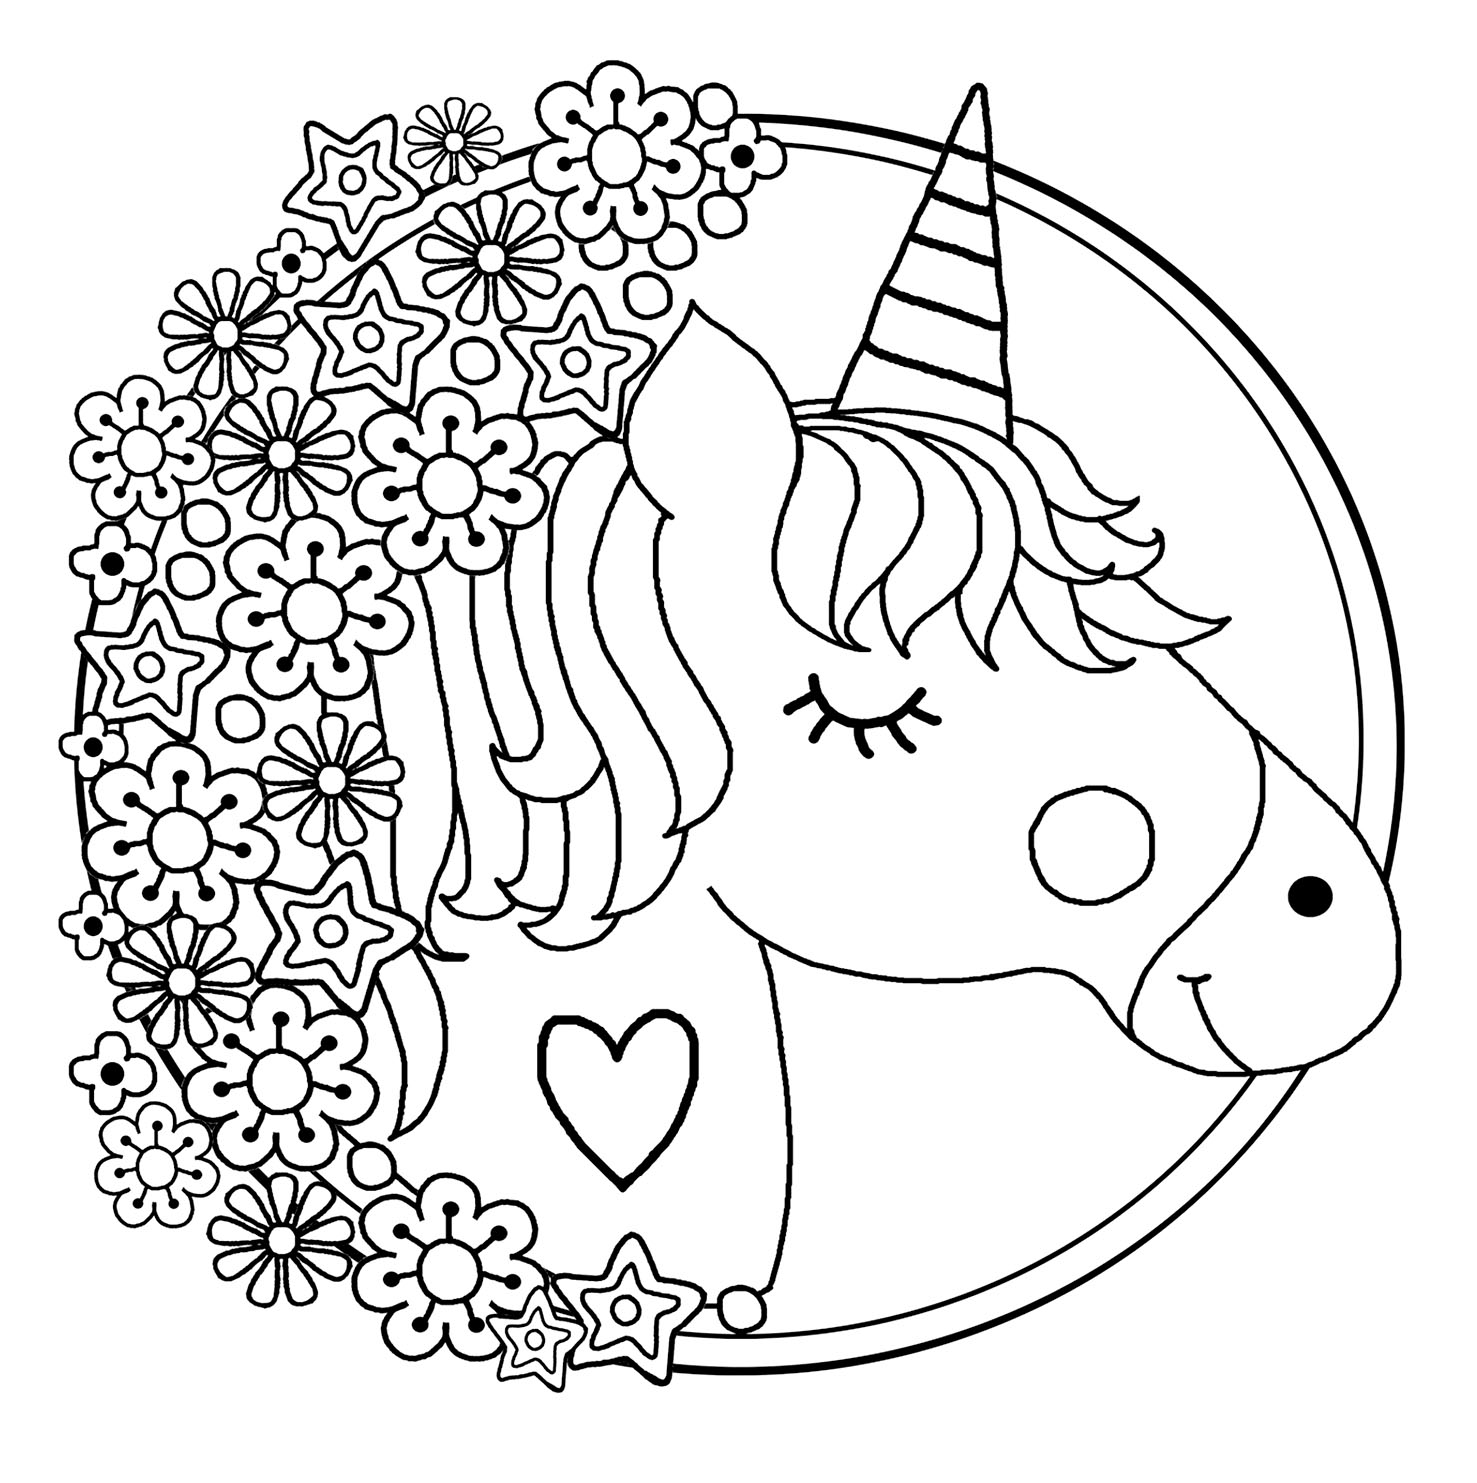 Unicorns free to color for kids - Unicorns Kids Coloring Pages